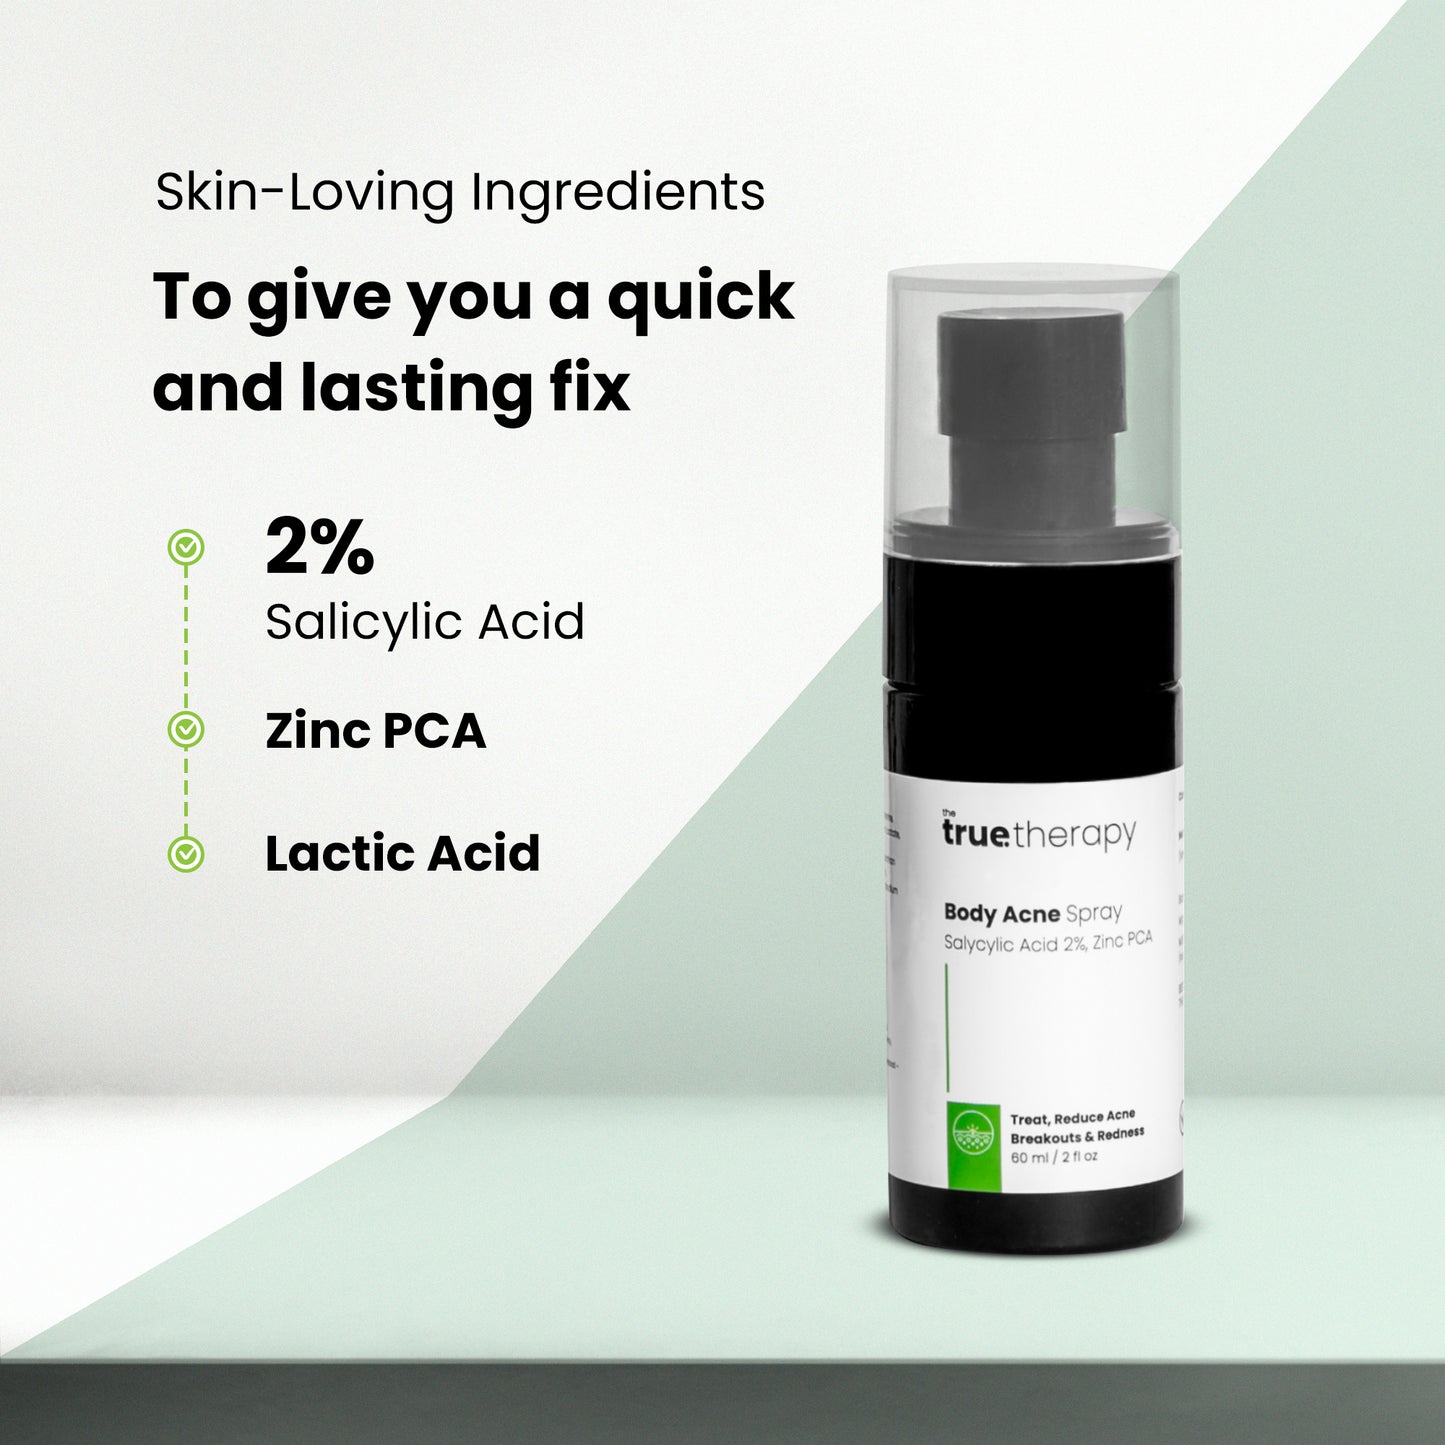 Body Acne Spray with 2% Salycylic Acid and Lactic Acid Ingredients